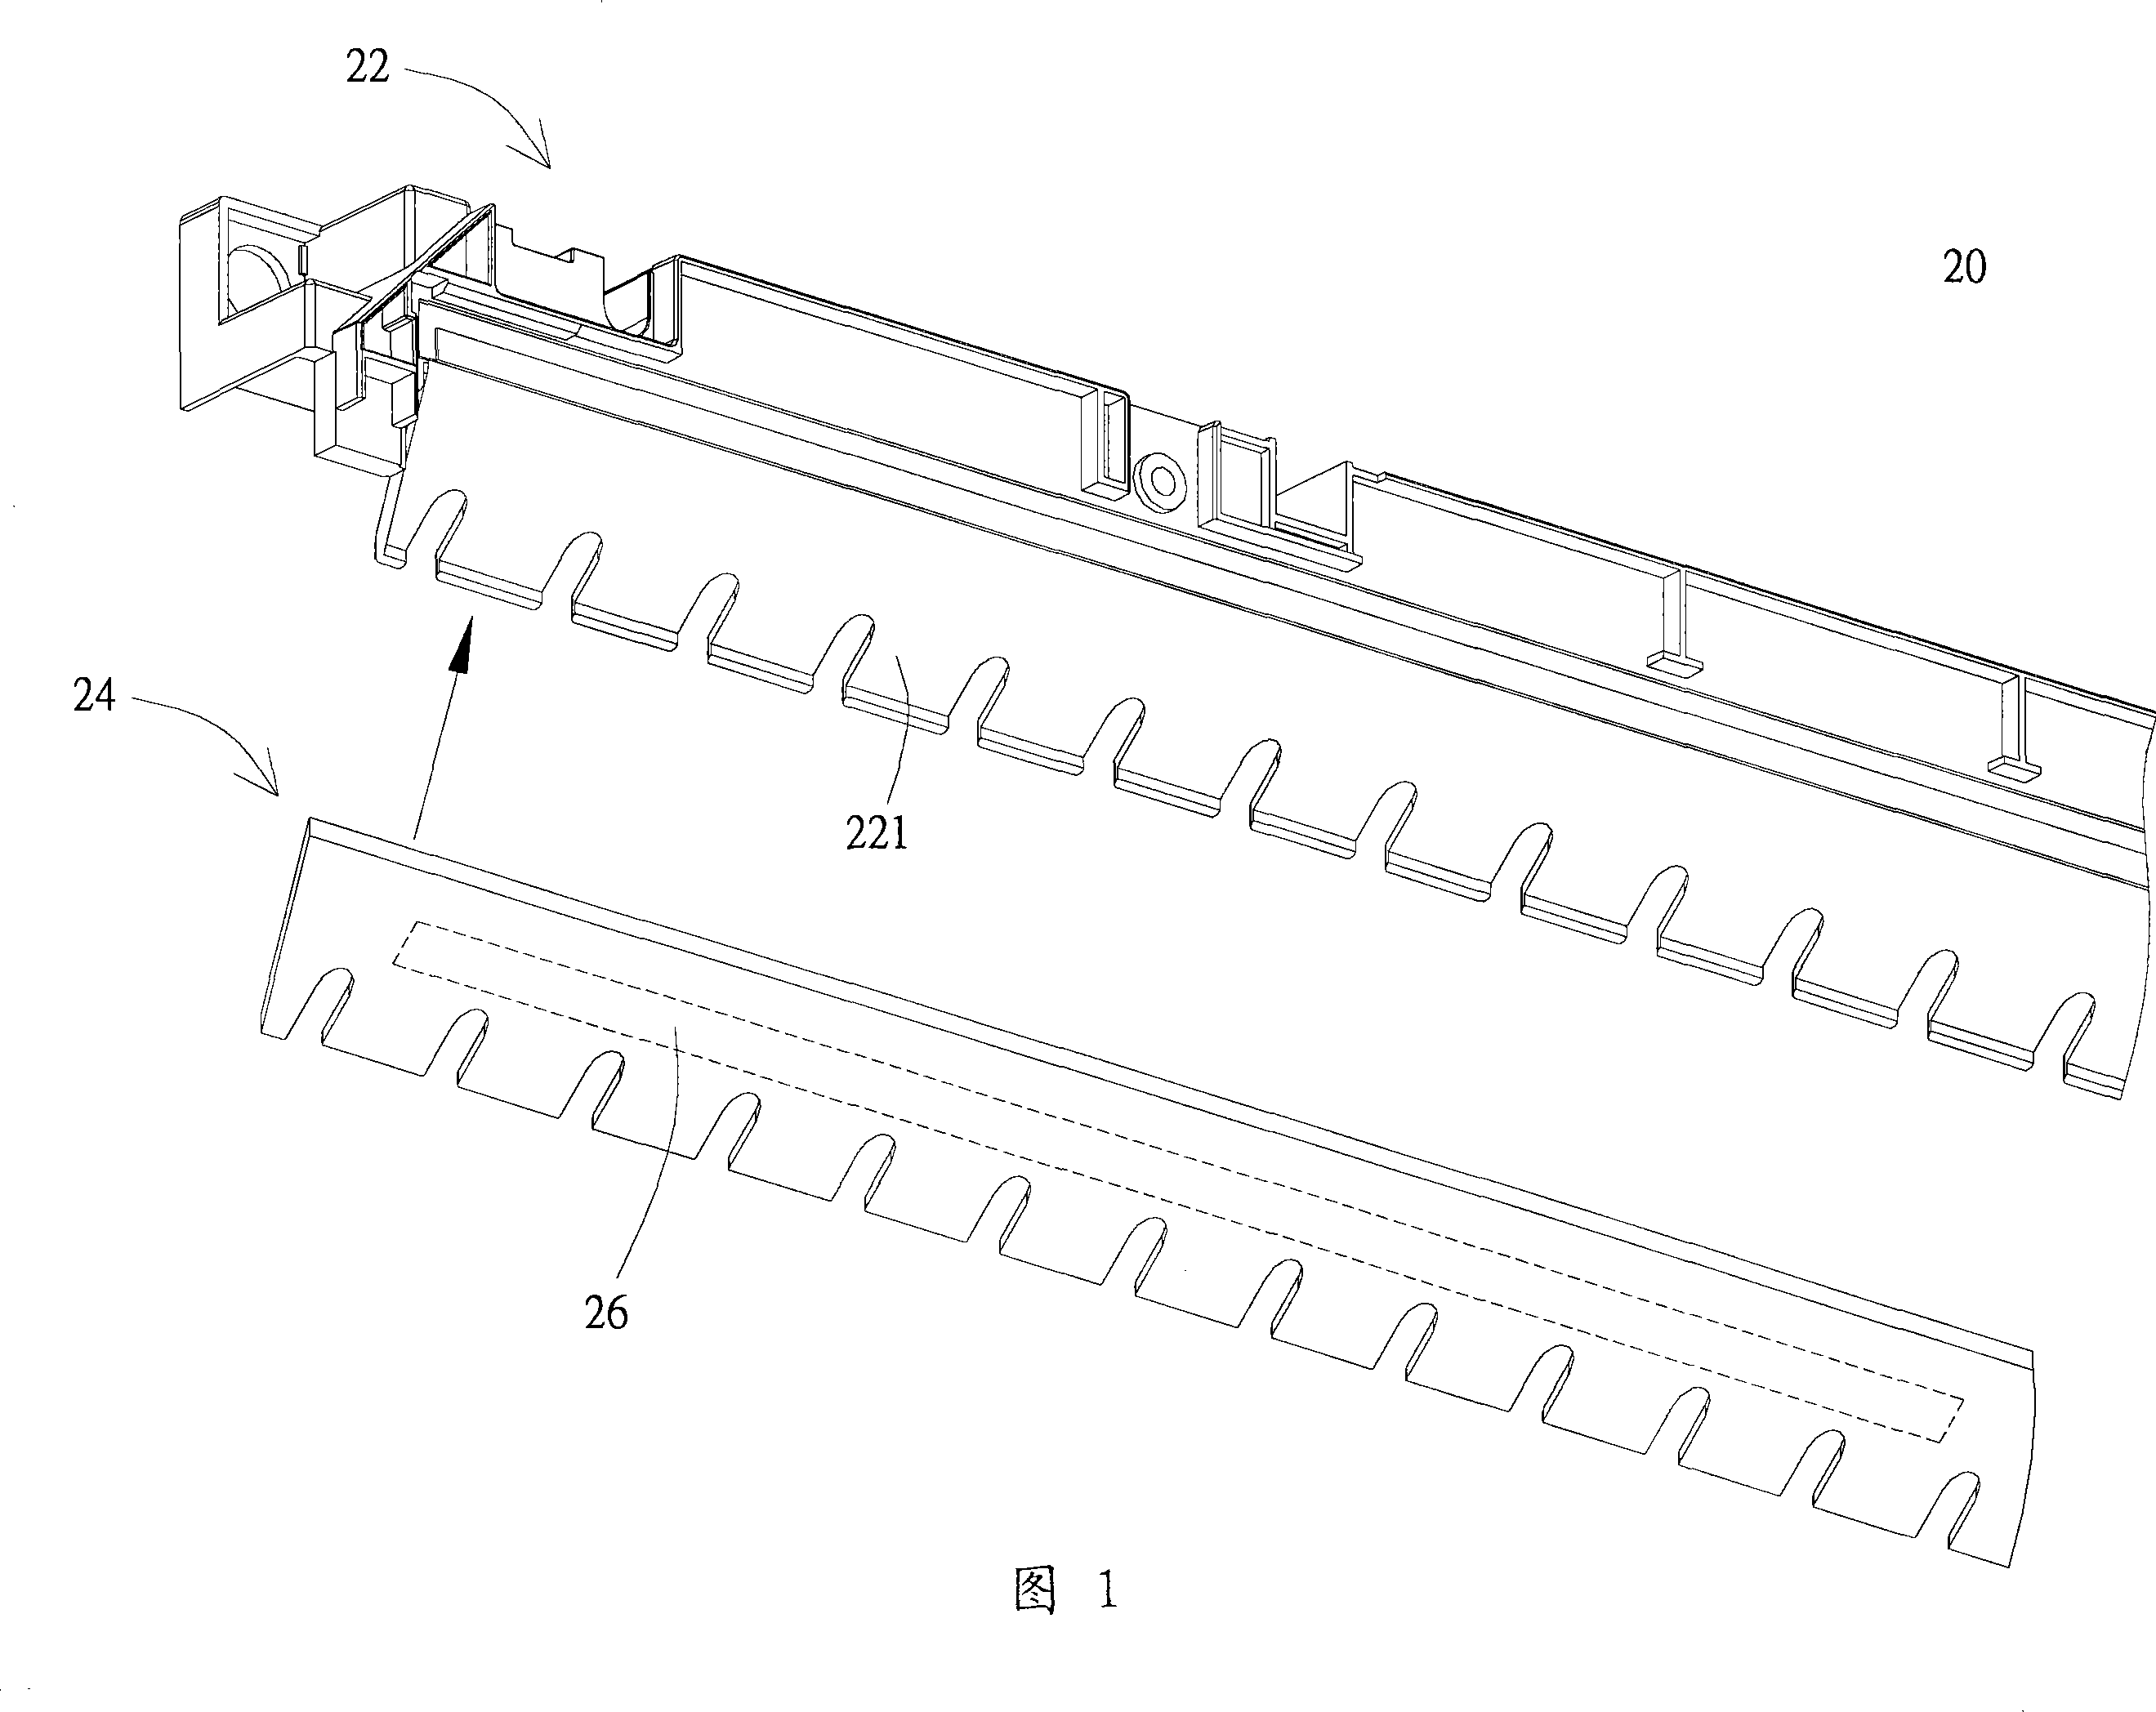 Light source module structure and light tube rack using the same